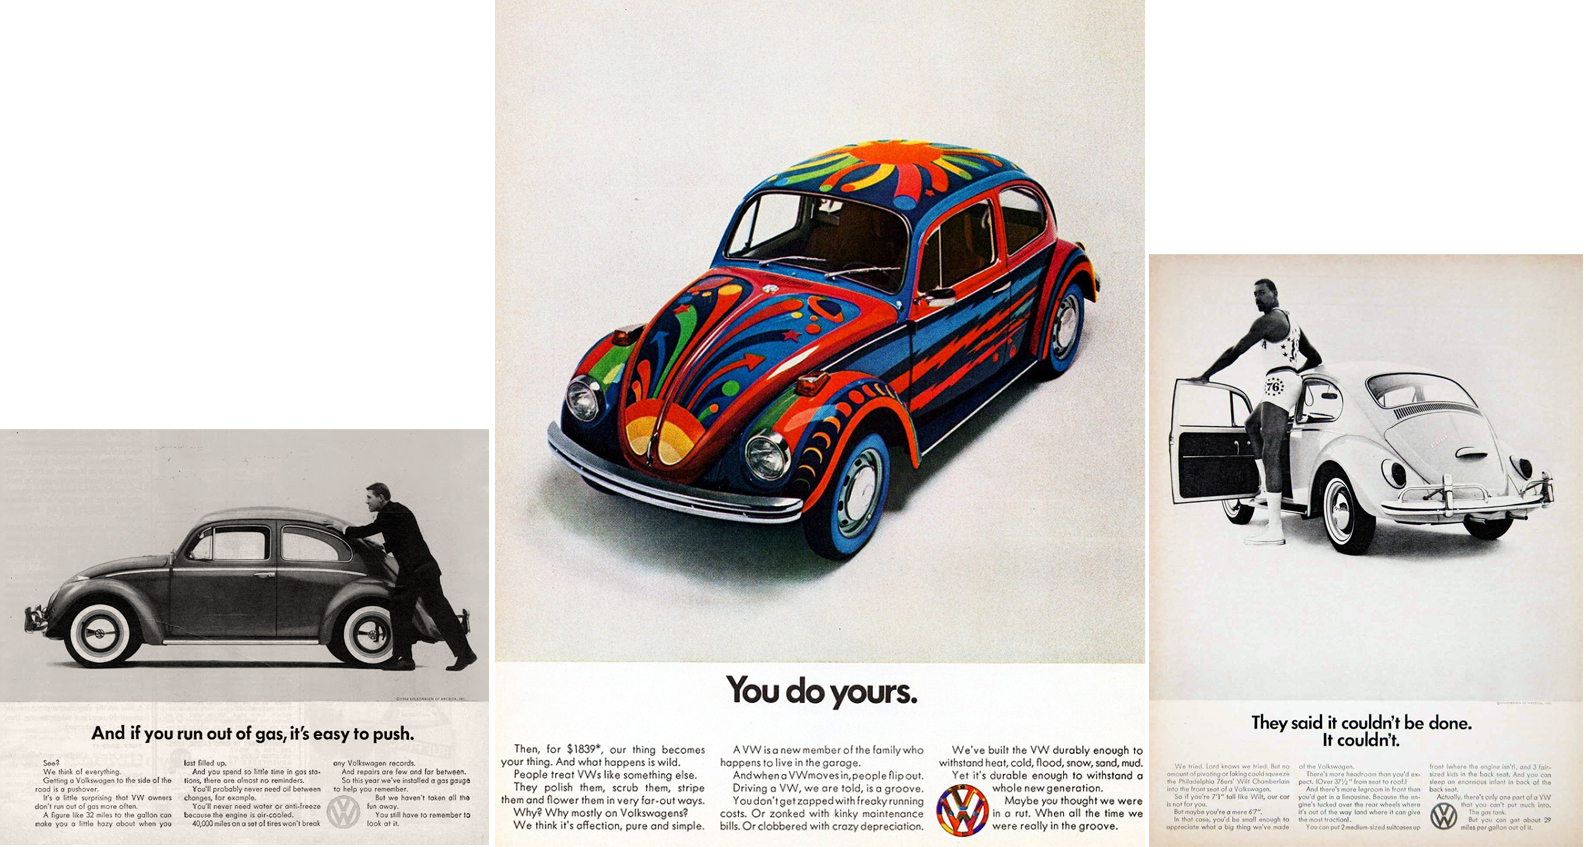 "Three vintage Volkswagen print ads that ran under the Think Small campaign"